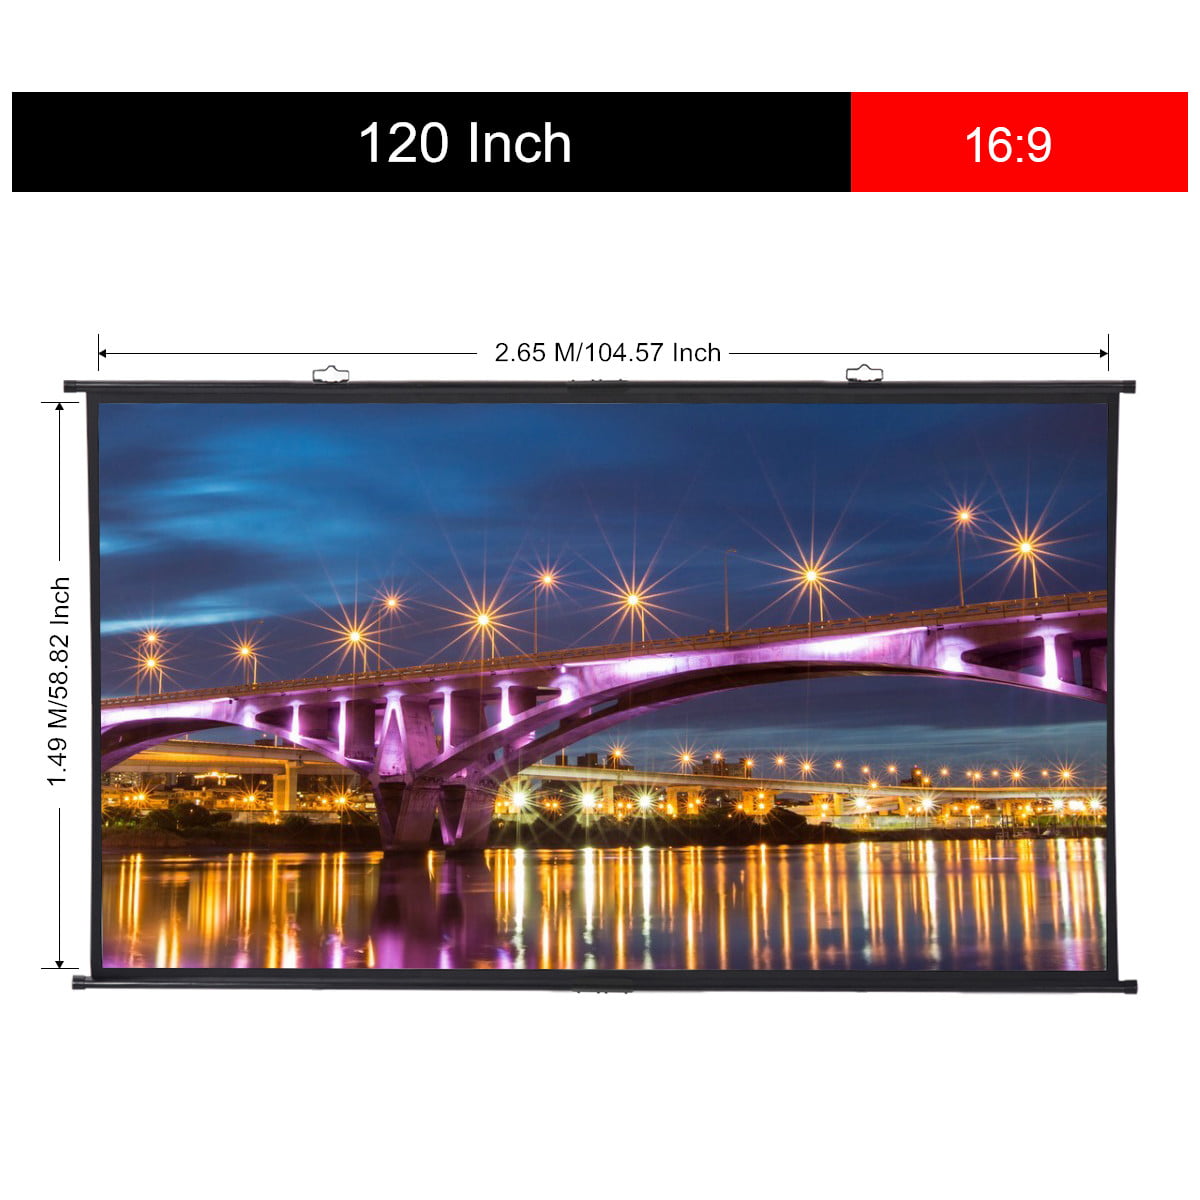 Excelvan Projector Screen 120 Inch,16:9 120 Wall-Mounted HD Movie Projection Screen for Indoor 4K Full HD and 3D Projector 